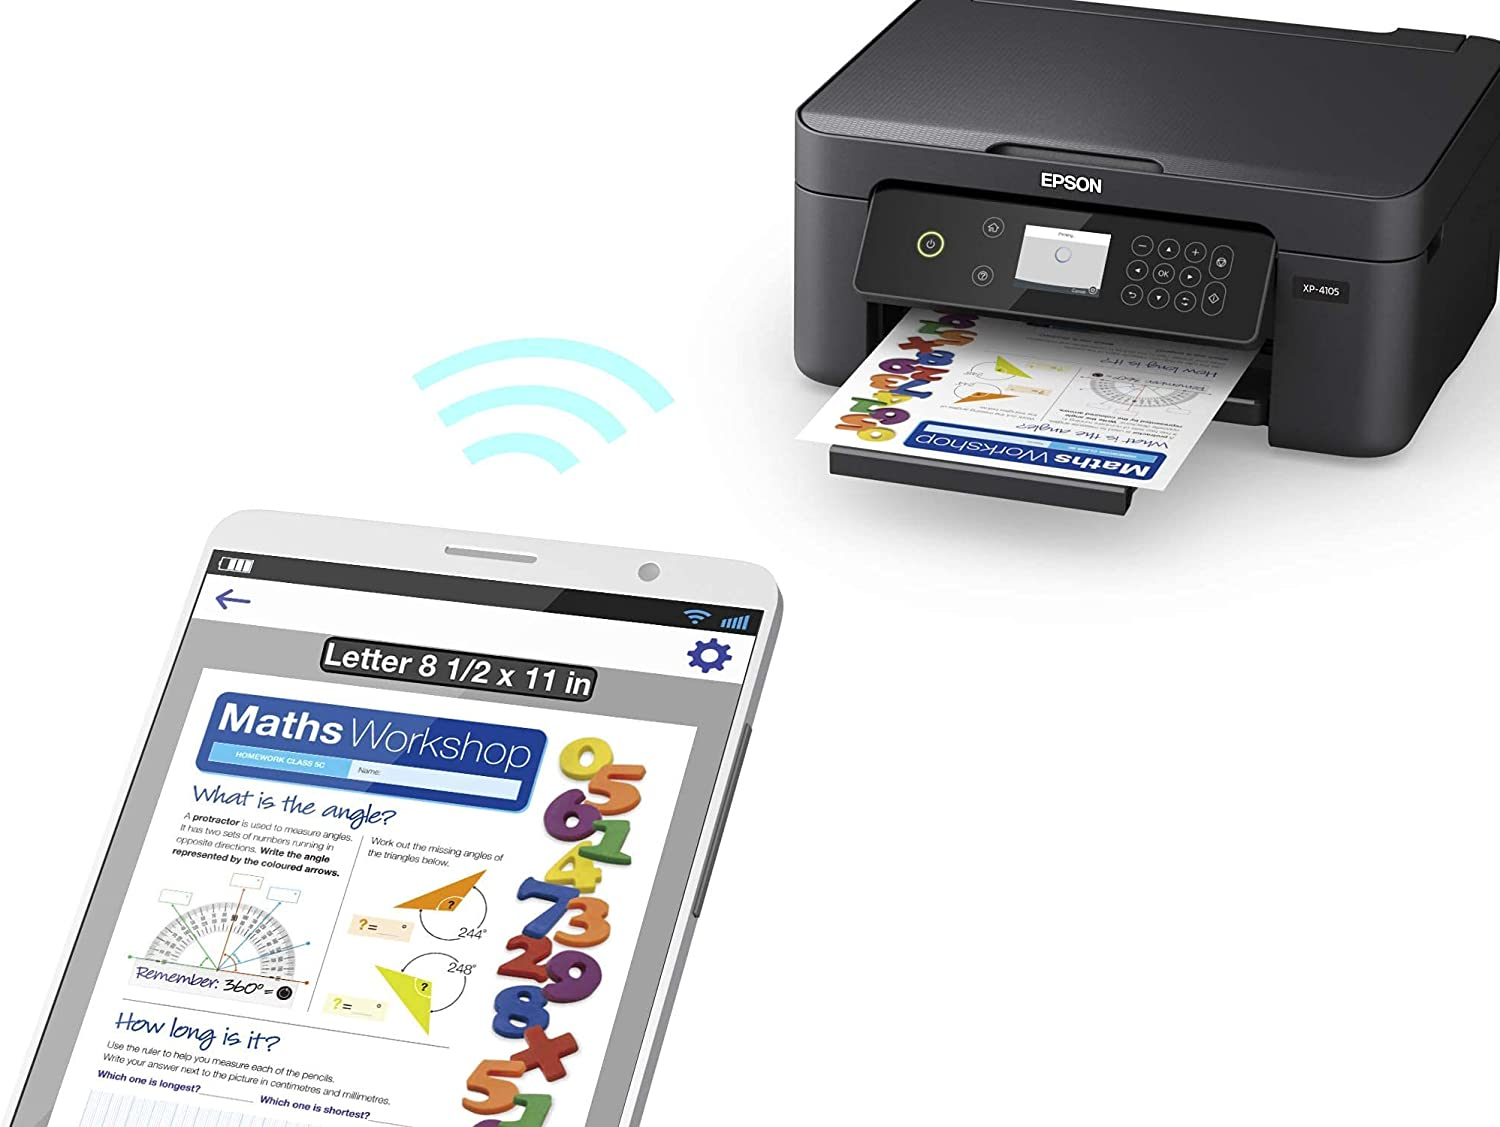 Epson Premium Expression Home 4105 Series Small All-In-One Color Inkjet Printer I Print Copy Scan I Wireless I Mobile Printing I Auto 2-Sided Printing I 2.4" LCD I 10 ISO Ppm (Renewed)